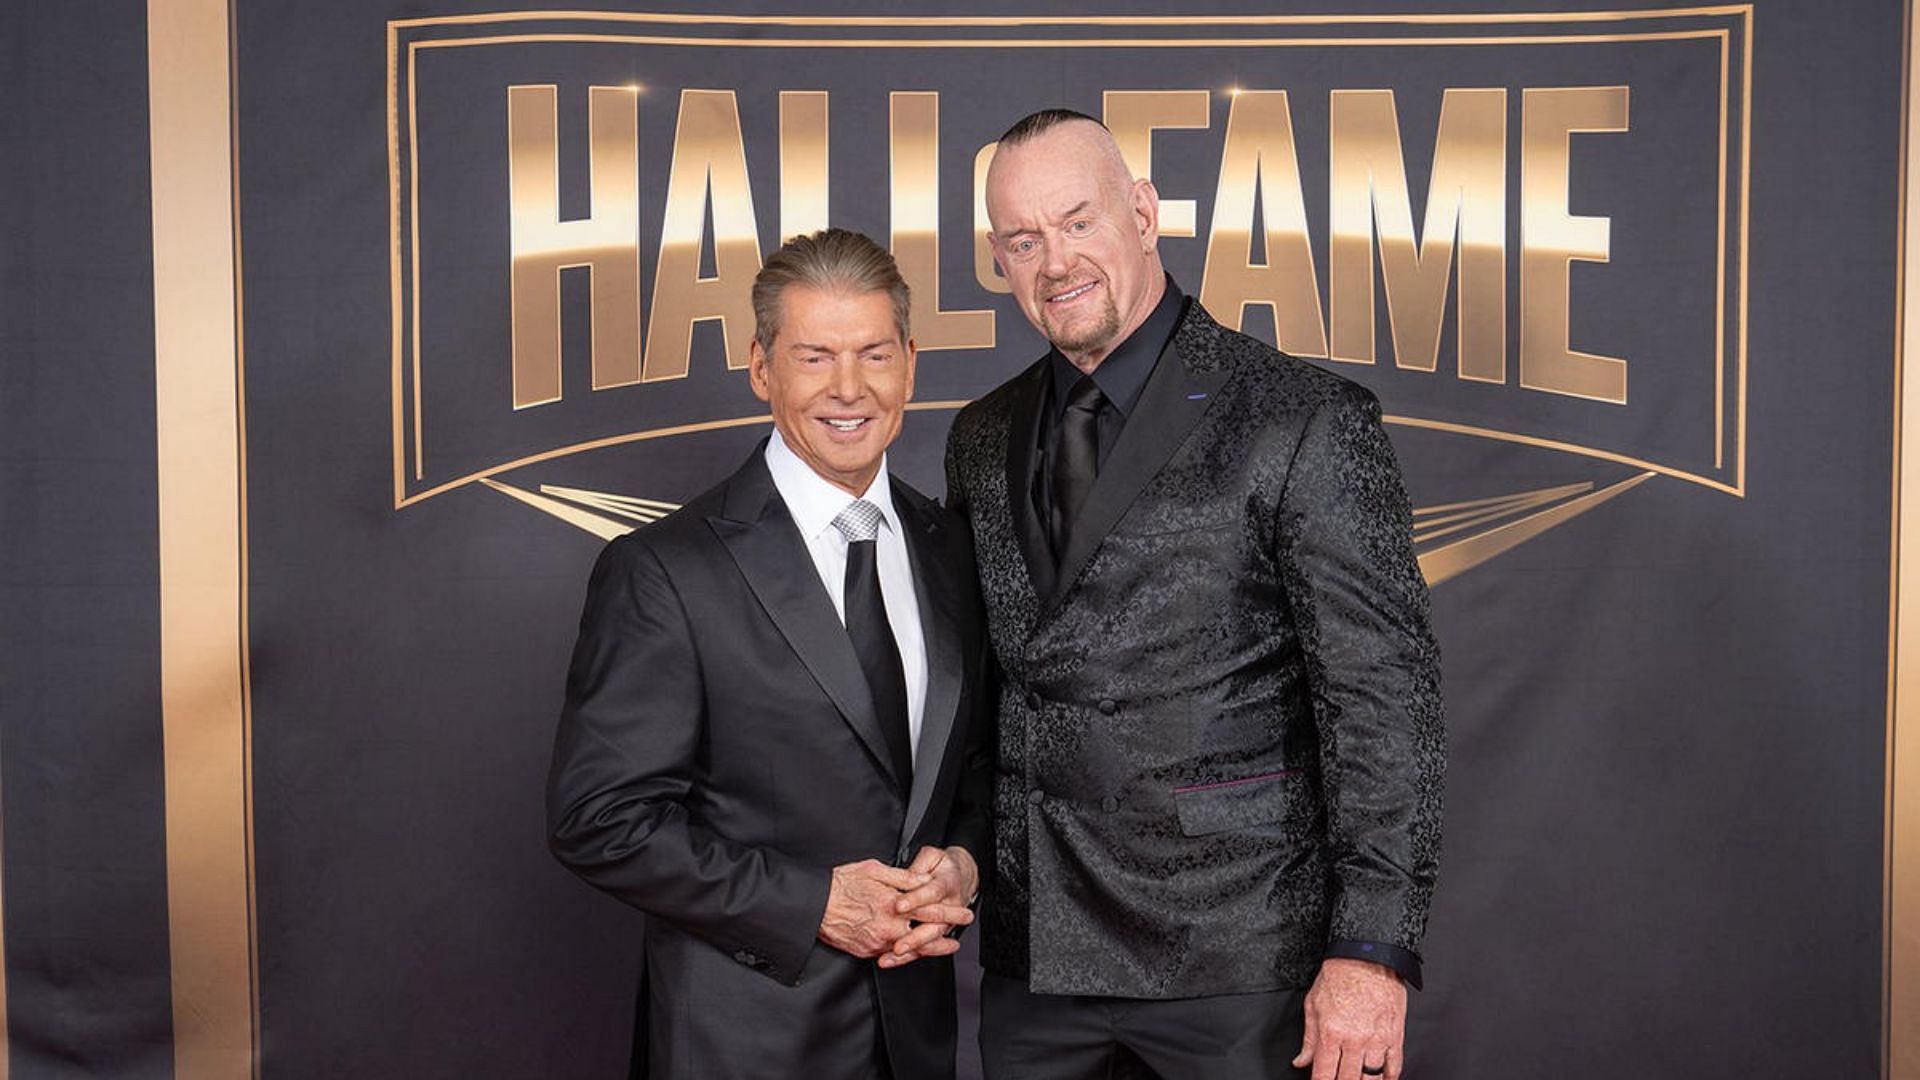 Vince McMahon (left) and The Undertaker (right) at the 2022 WWE Hall of Fame